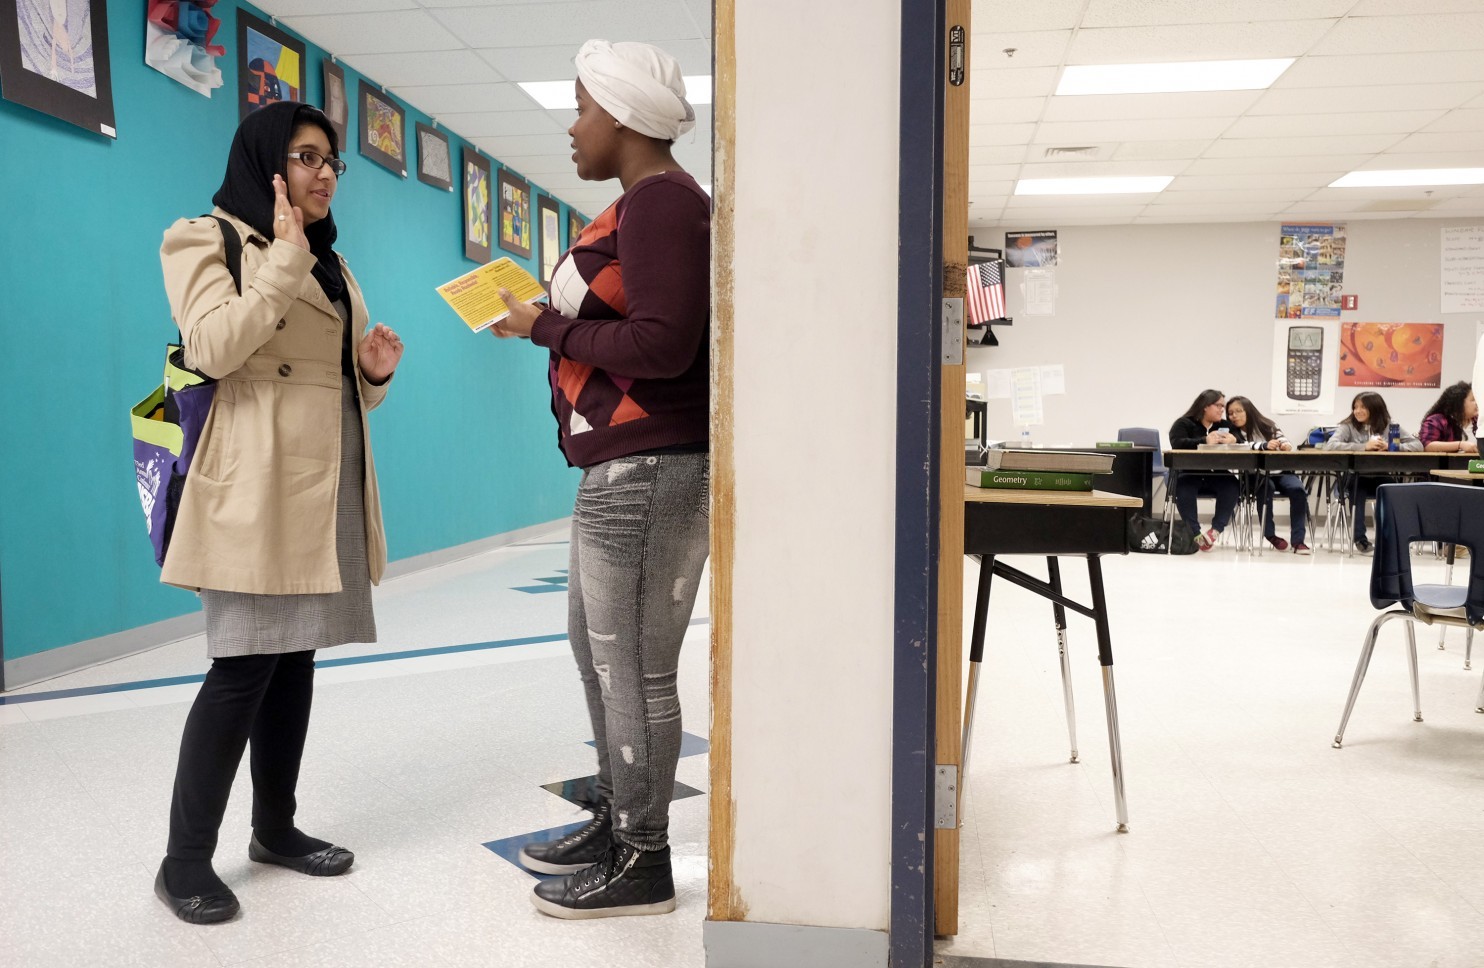 Raaheela Ahmed, 22, speaks with Lindsey Adva, 17, at Northwestern High School in Hyattsville, Md. Ahmed, who is running for a seat on the Prince George’s County Board of Education, is one of several young Muslim women getting involved in local politics. (Bonnie Jo Mount/The Washington Post) 